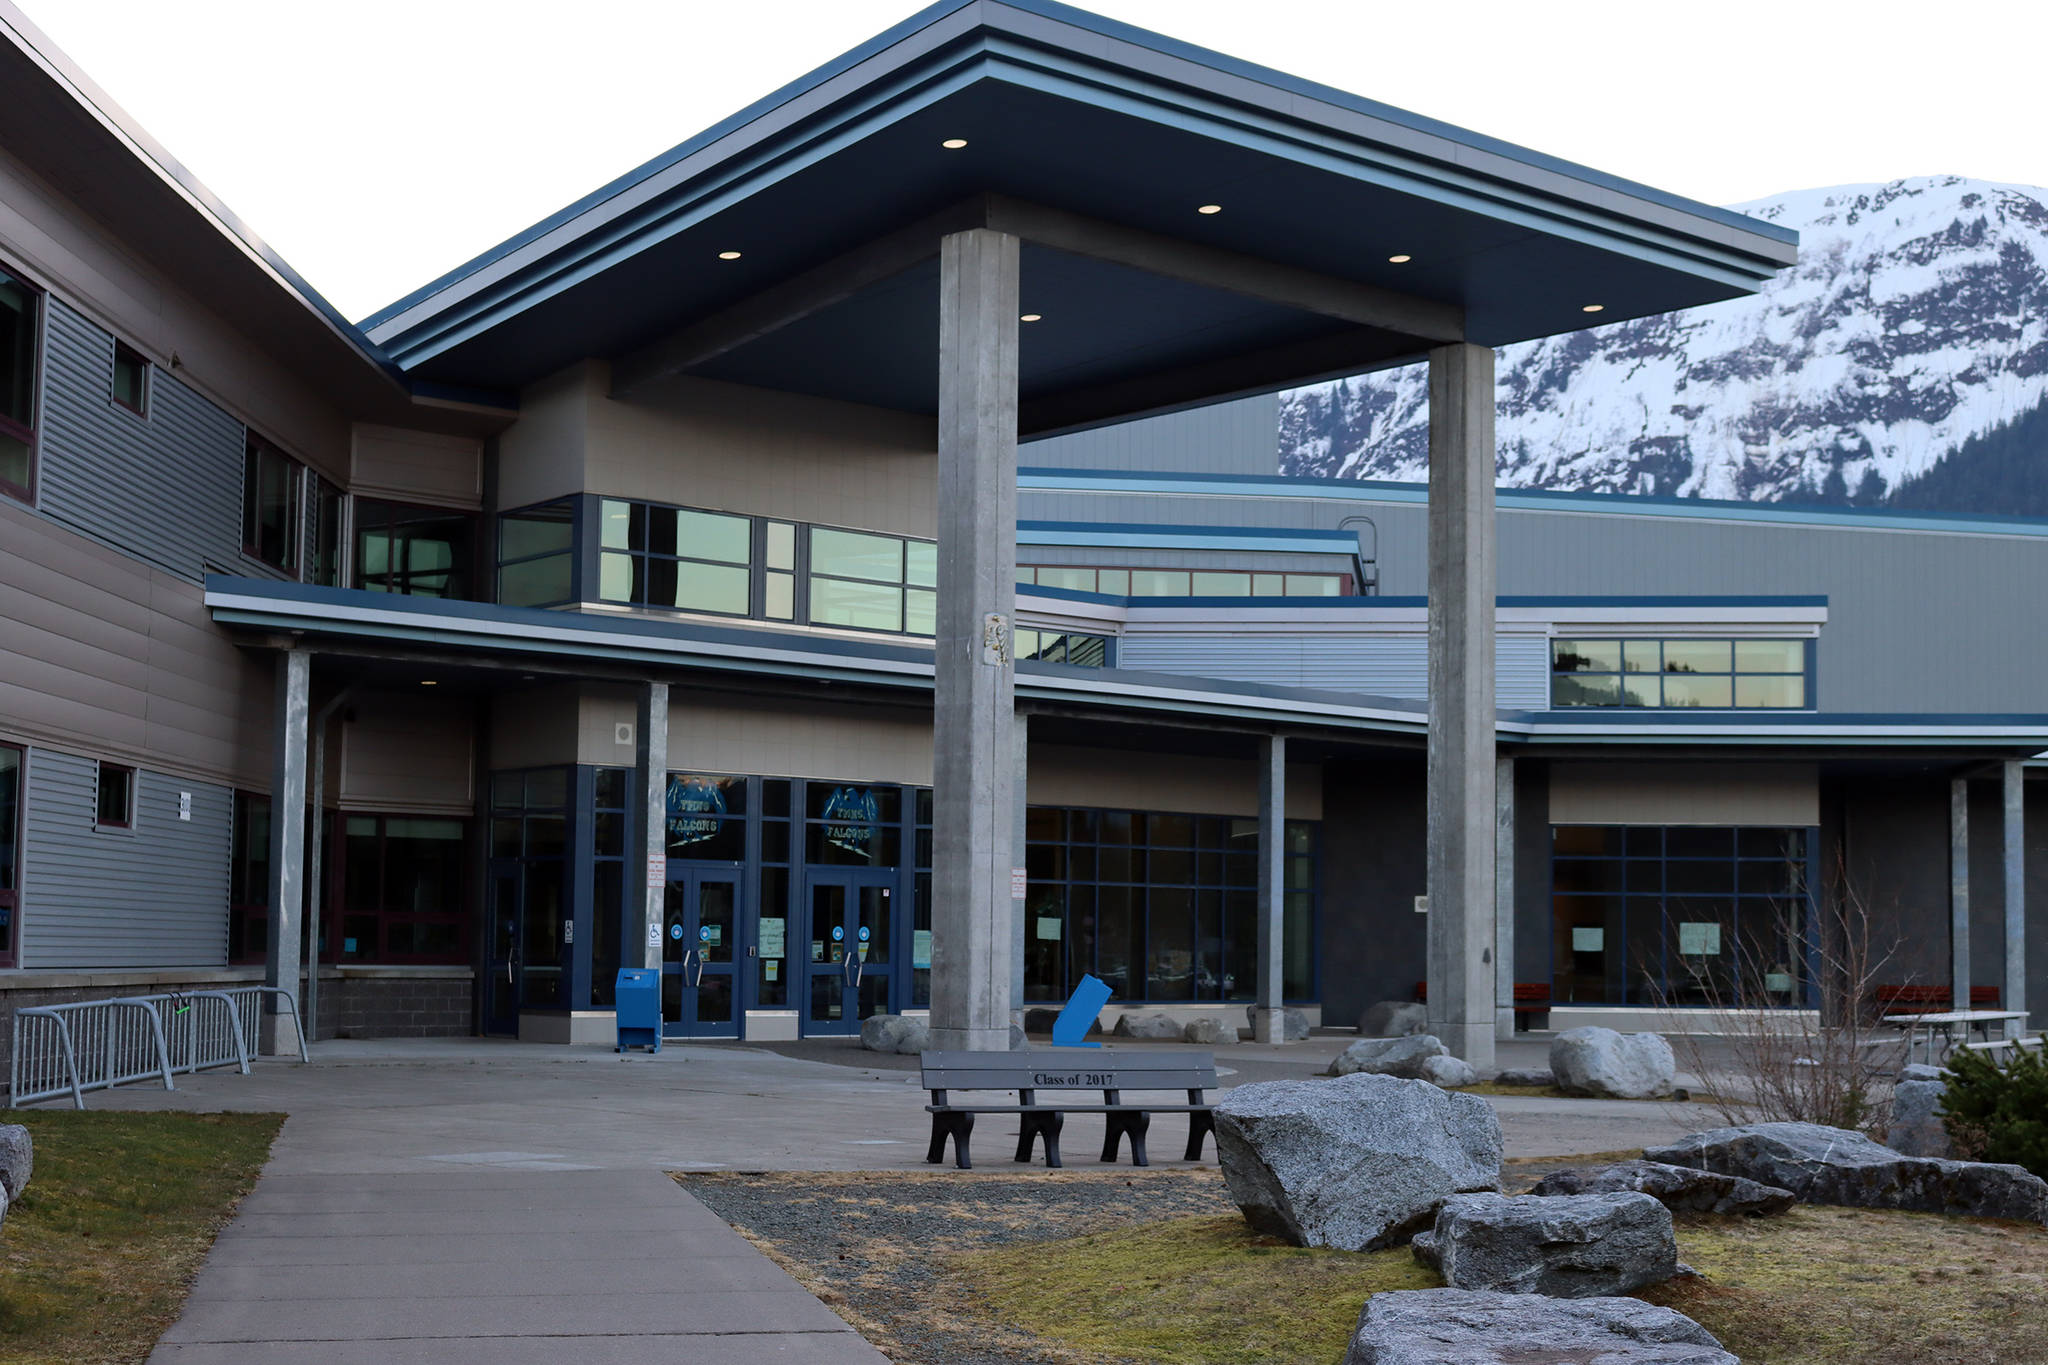 Thunder Mountain High School on April 18, 2021. Juneau School District officials are working to find two new principals for the school. (Ben Hohenstatt / Juneau Empire)